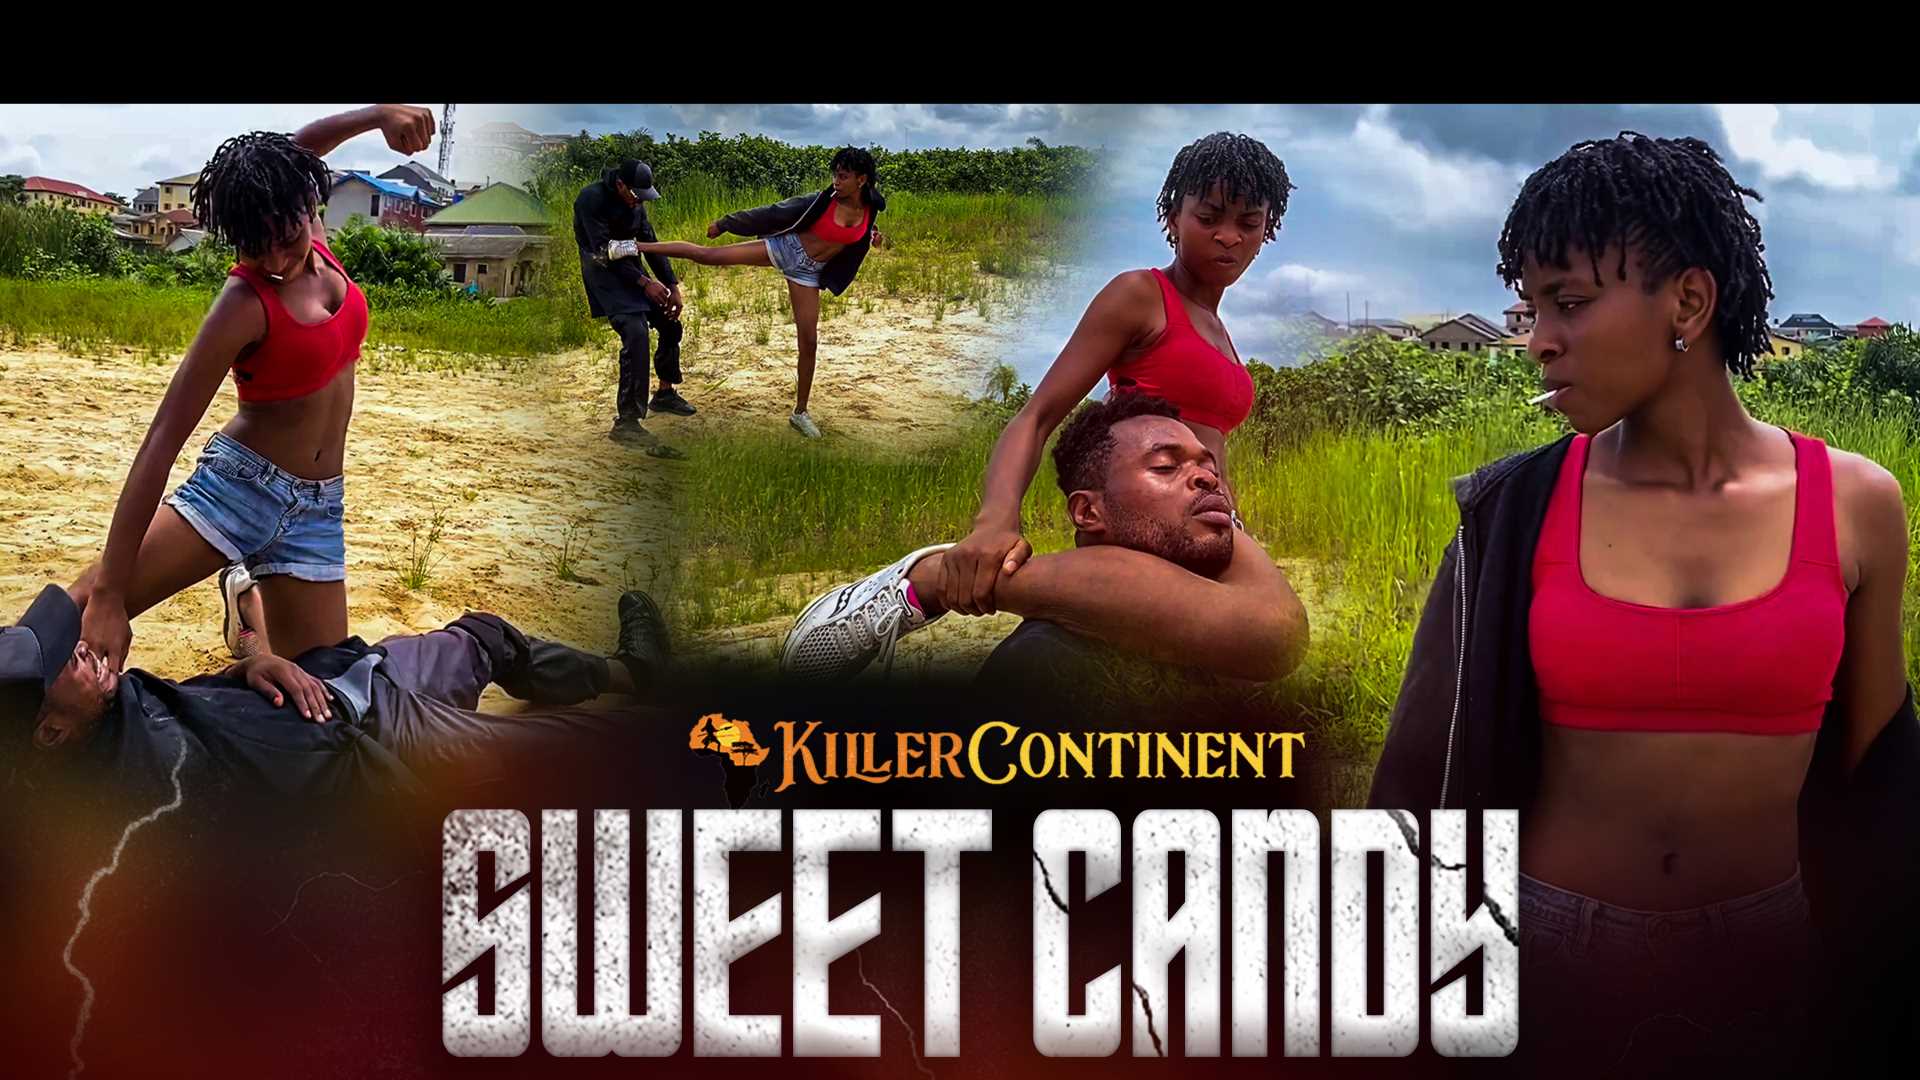 #3 - Sweet Candy